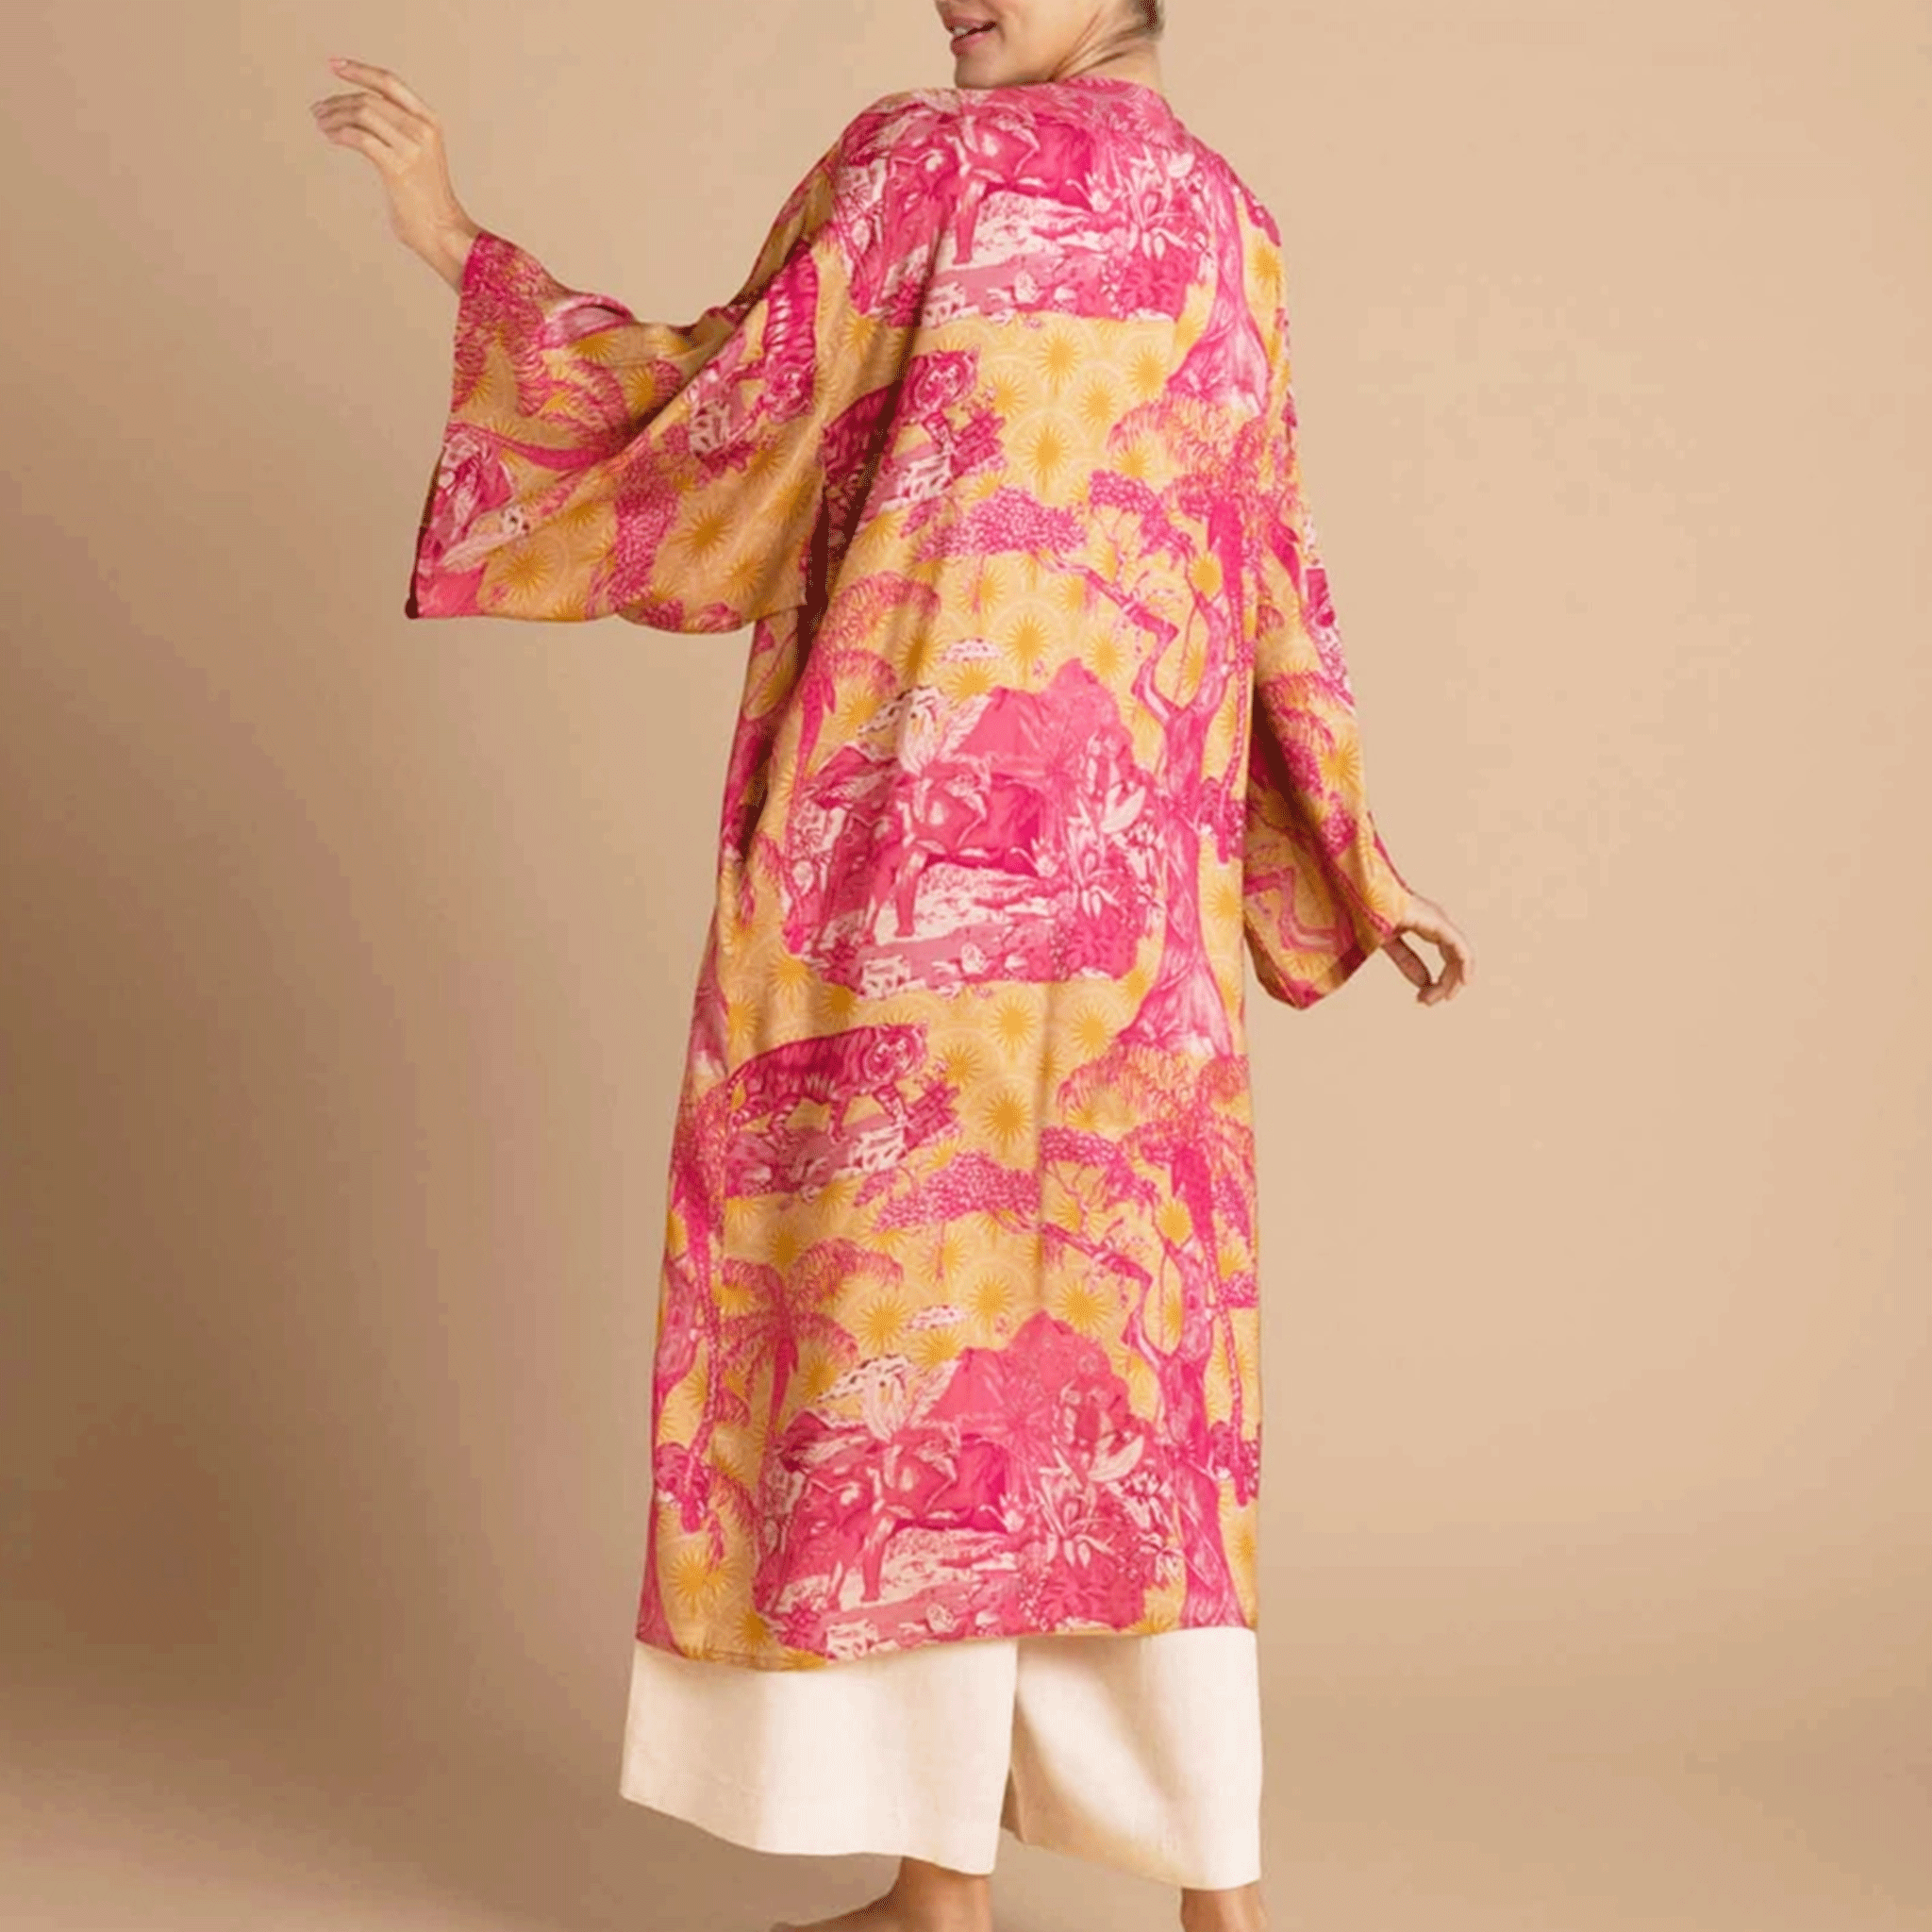 On a tan background is a model wearing a pink and yellow/orange robe with a tropical and floral print.